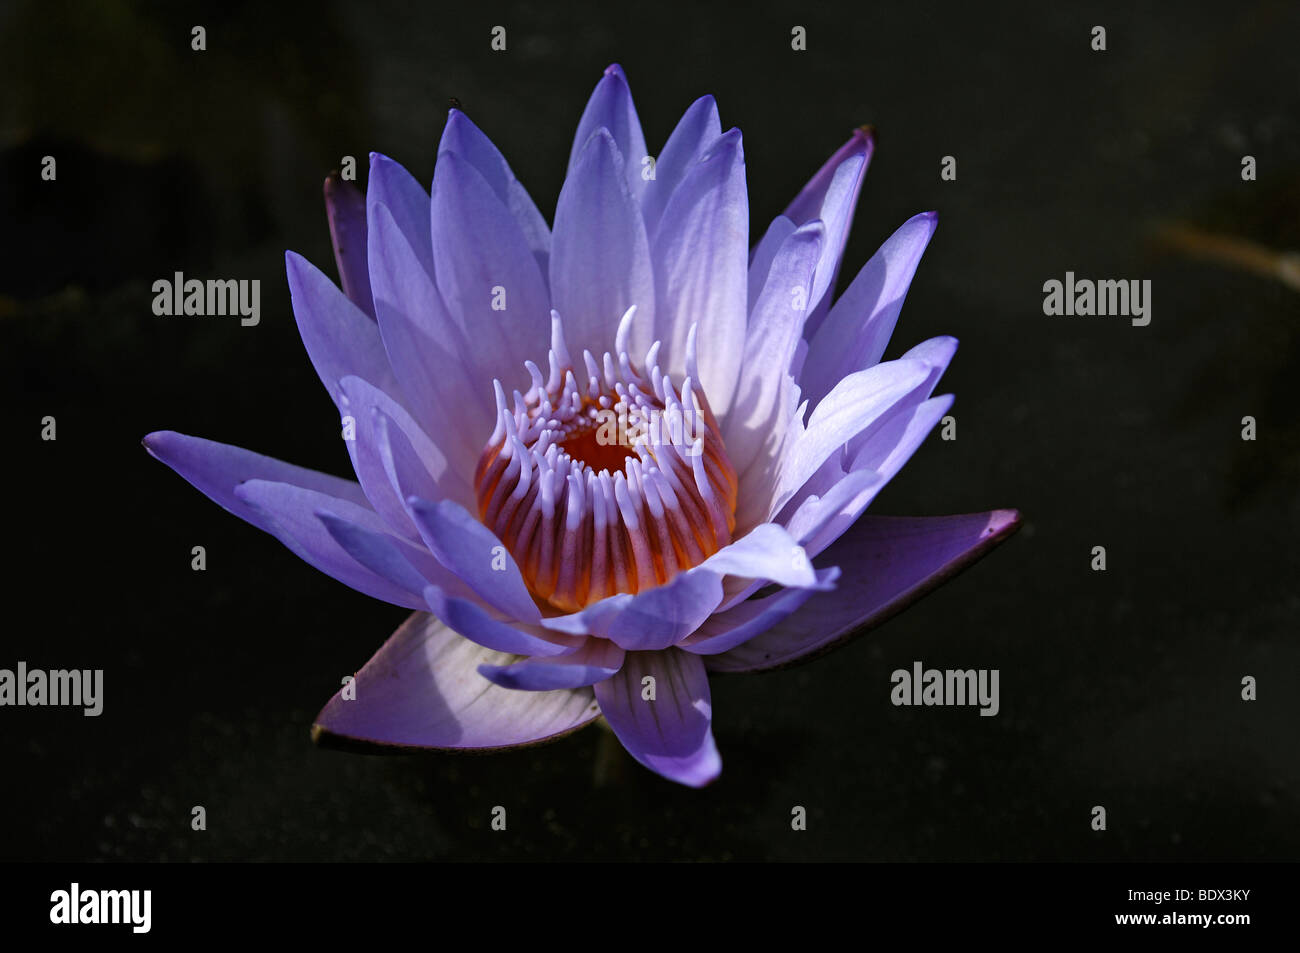 Water Lily flower (Nymphaea) Stock Photo